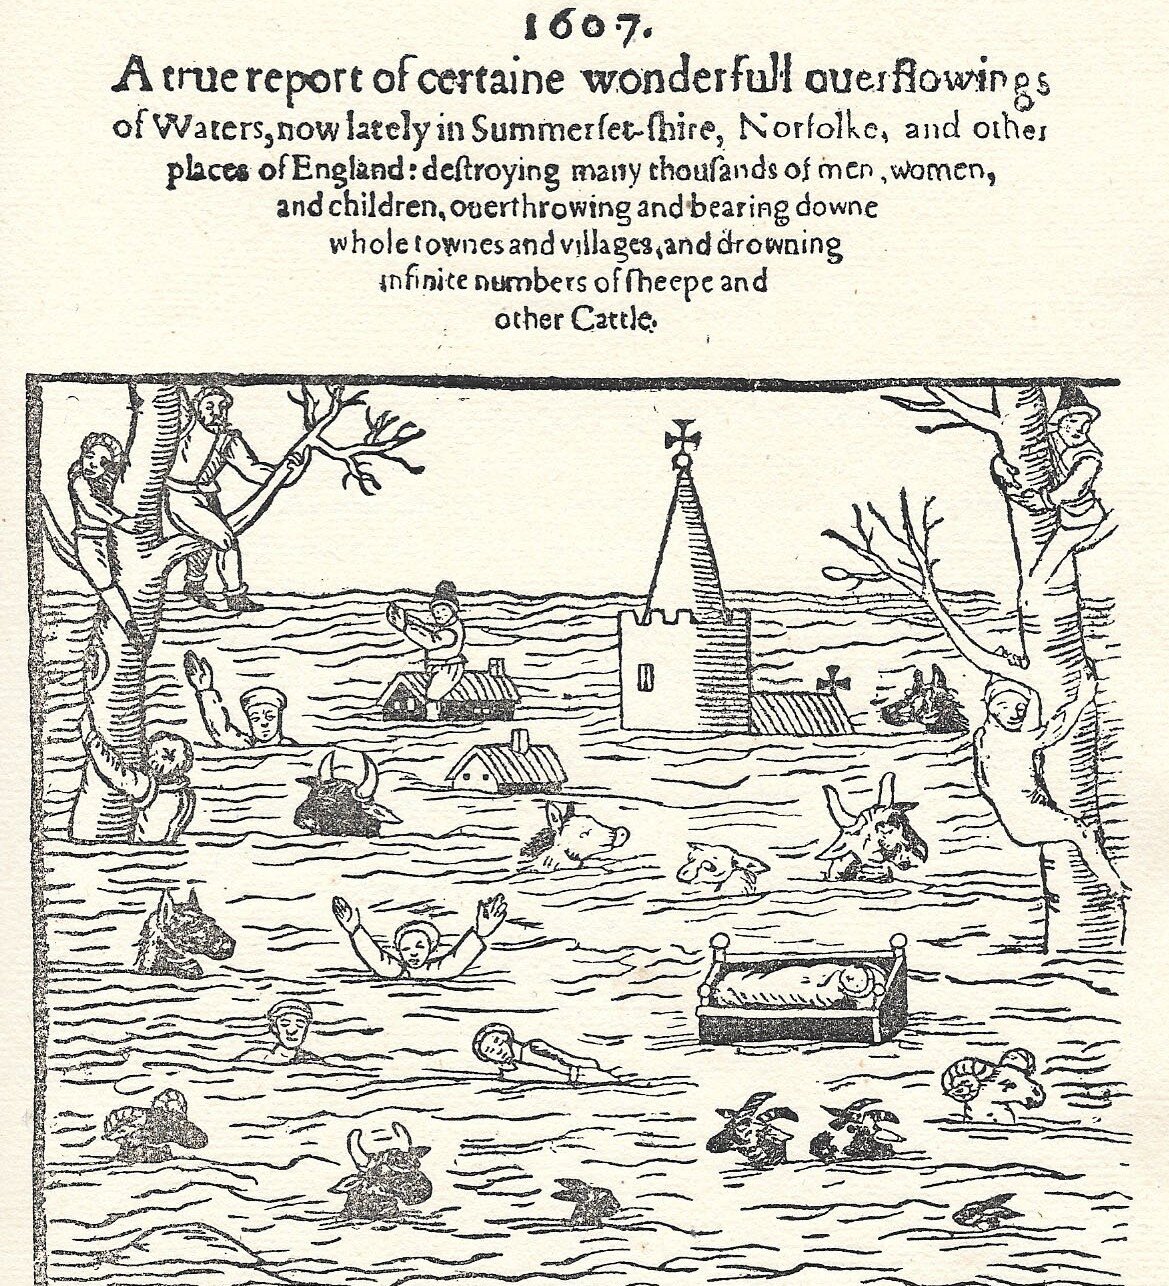 An illustration of Bristol's Great Flood from 1607. (Illustration: The British Library)